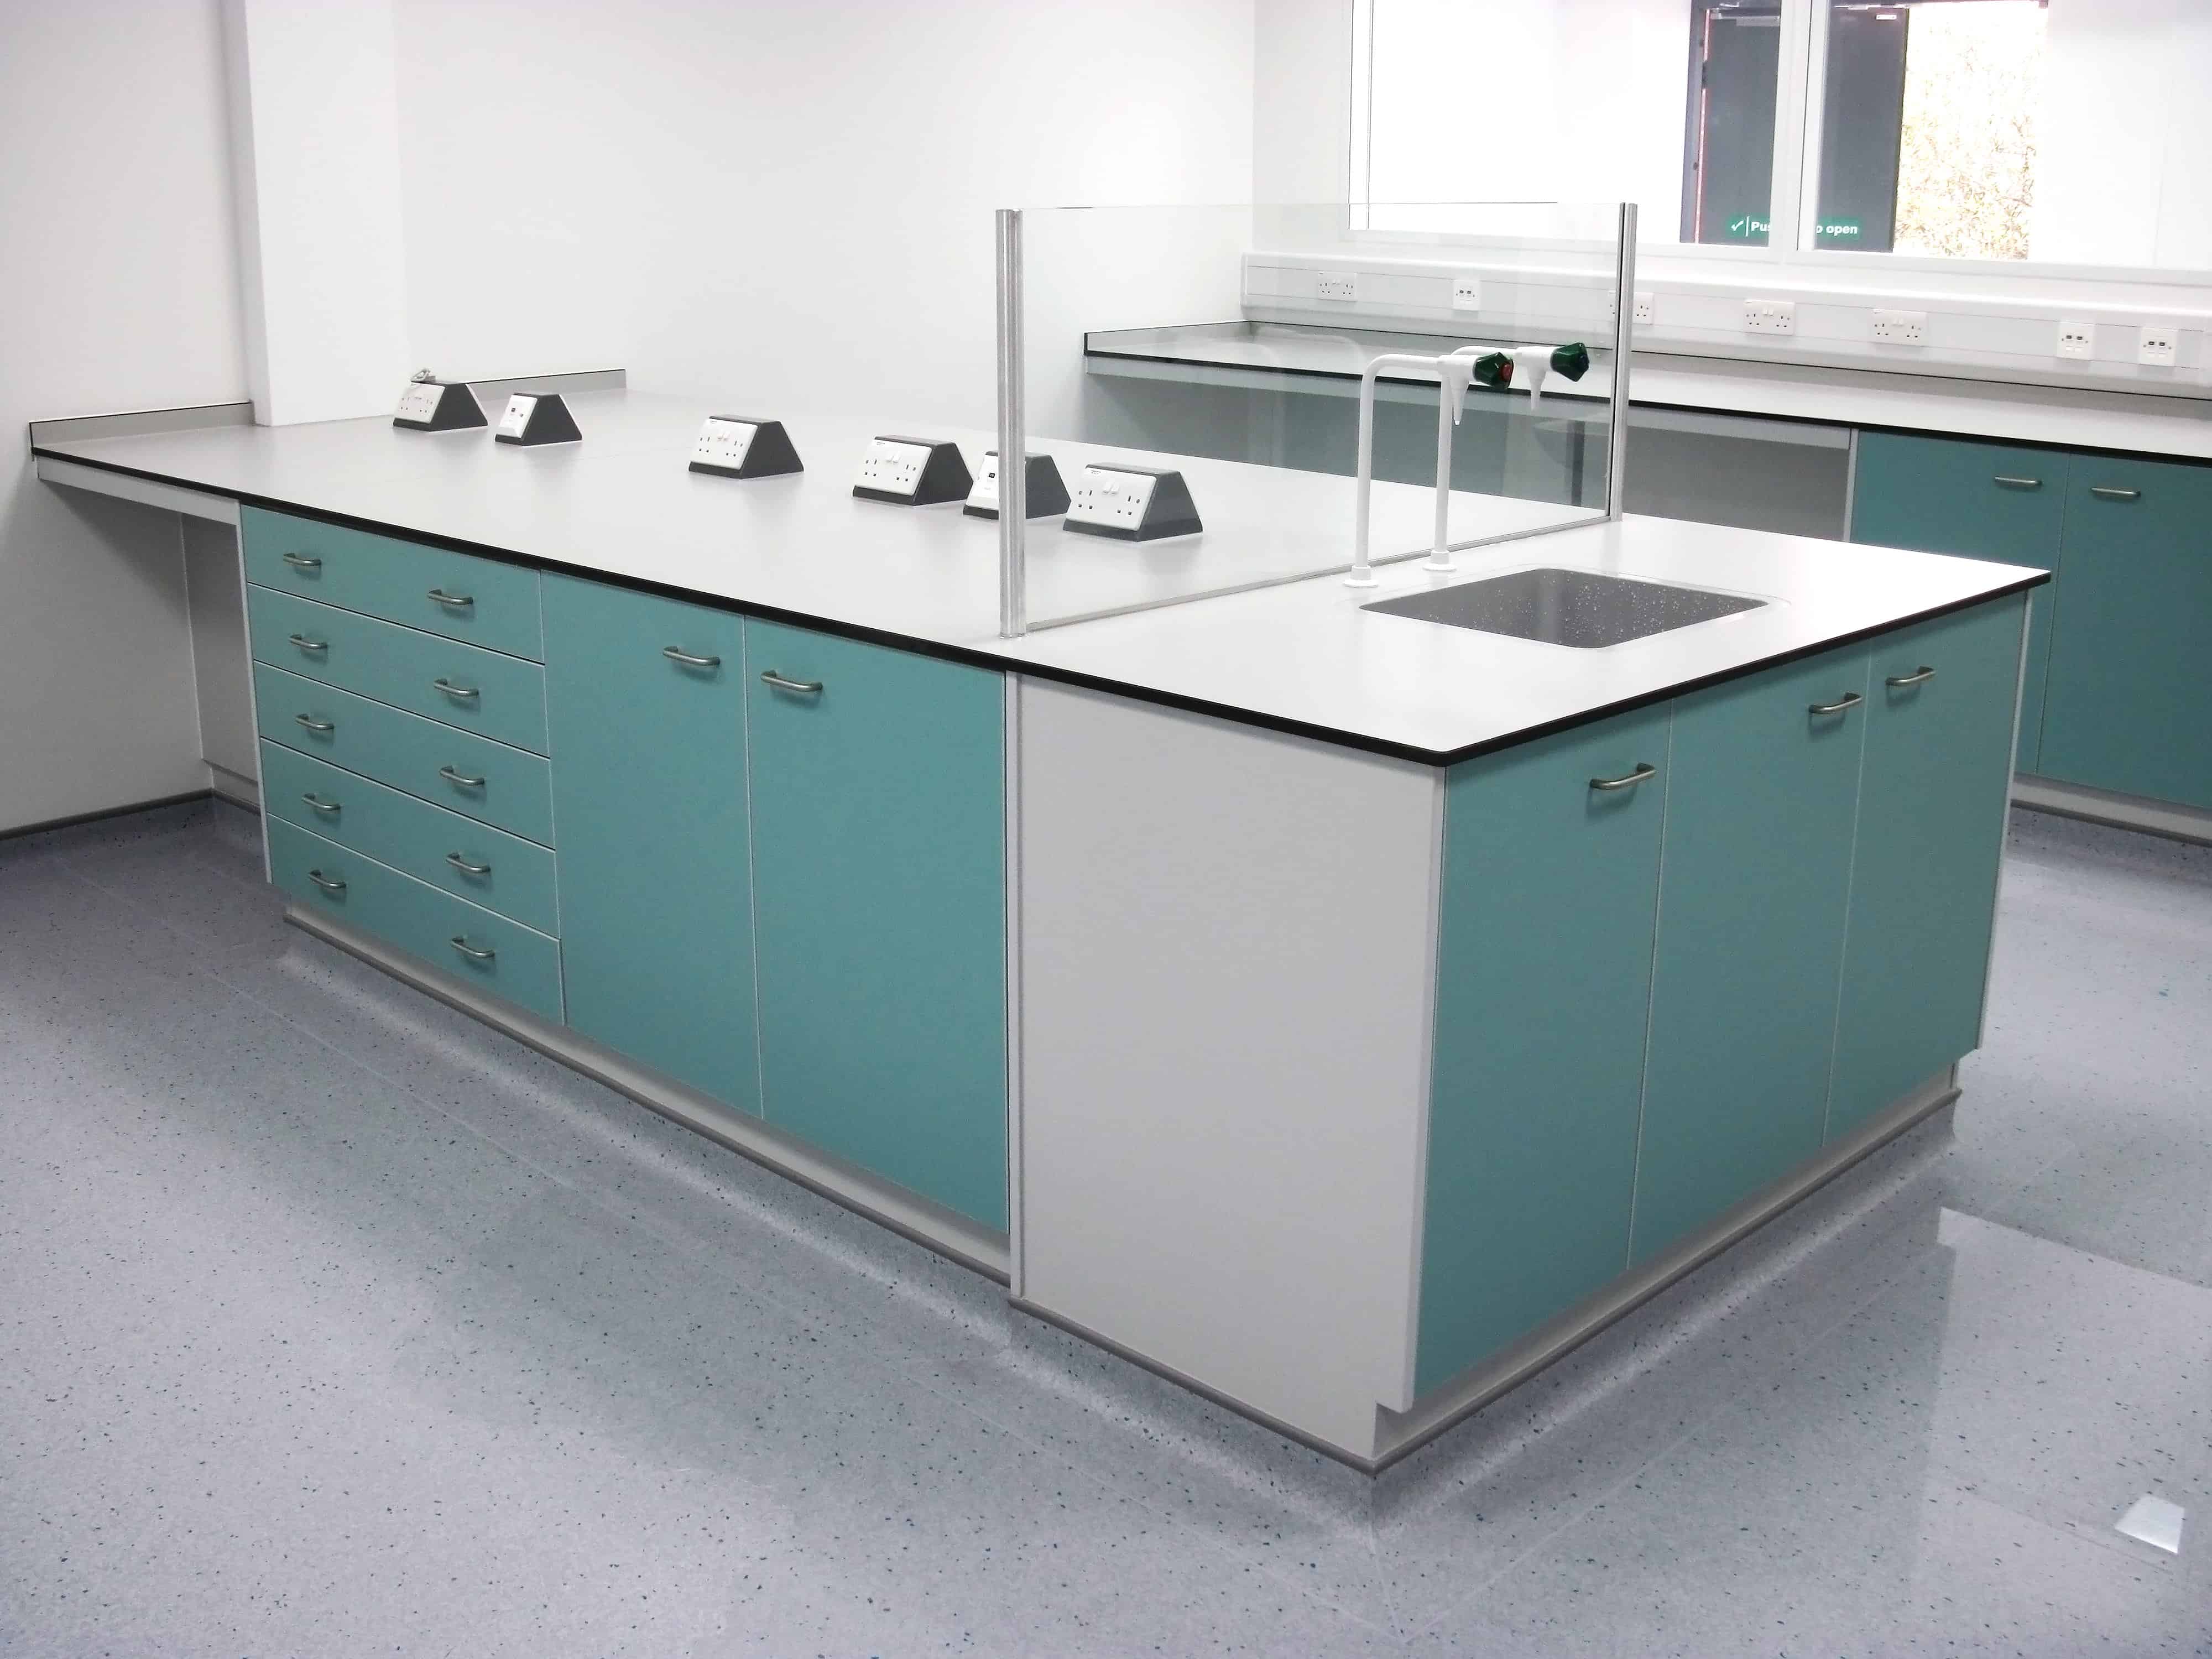 Laboratory Trespa worktop for research, industrial, university and medical laboratories.